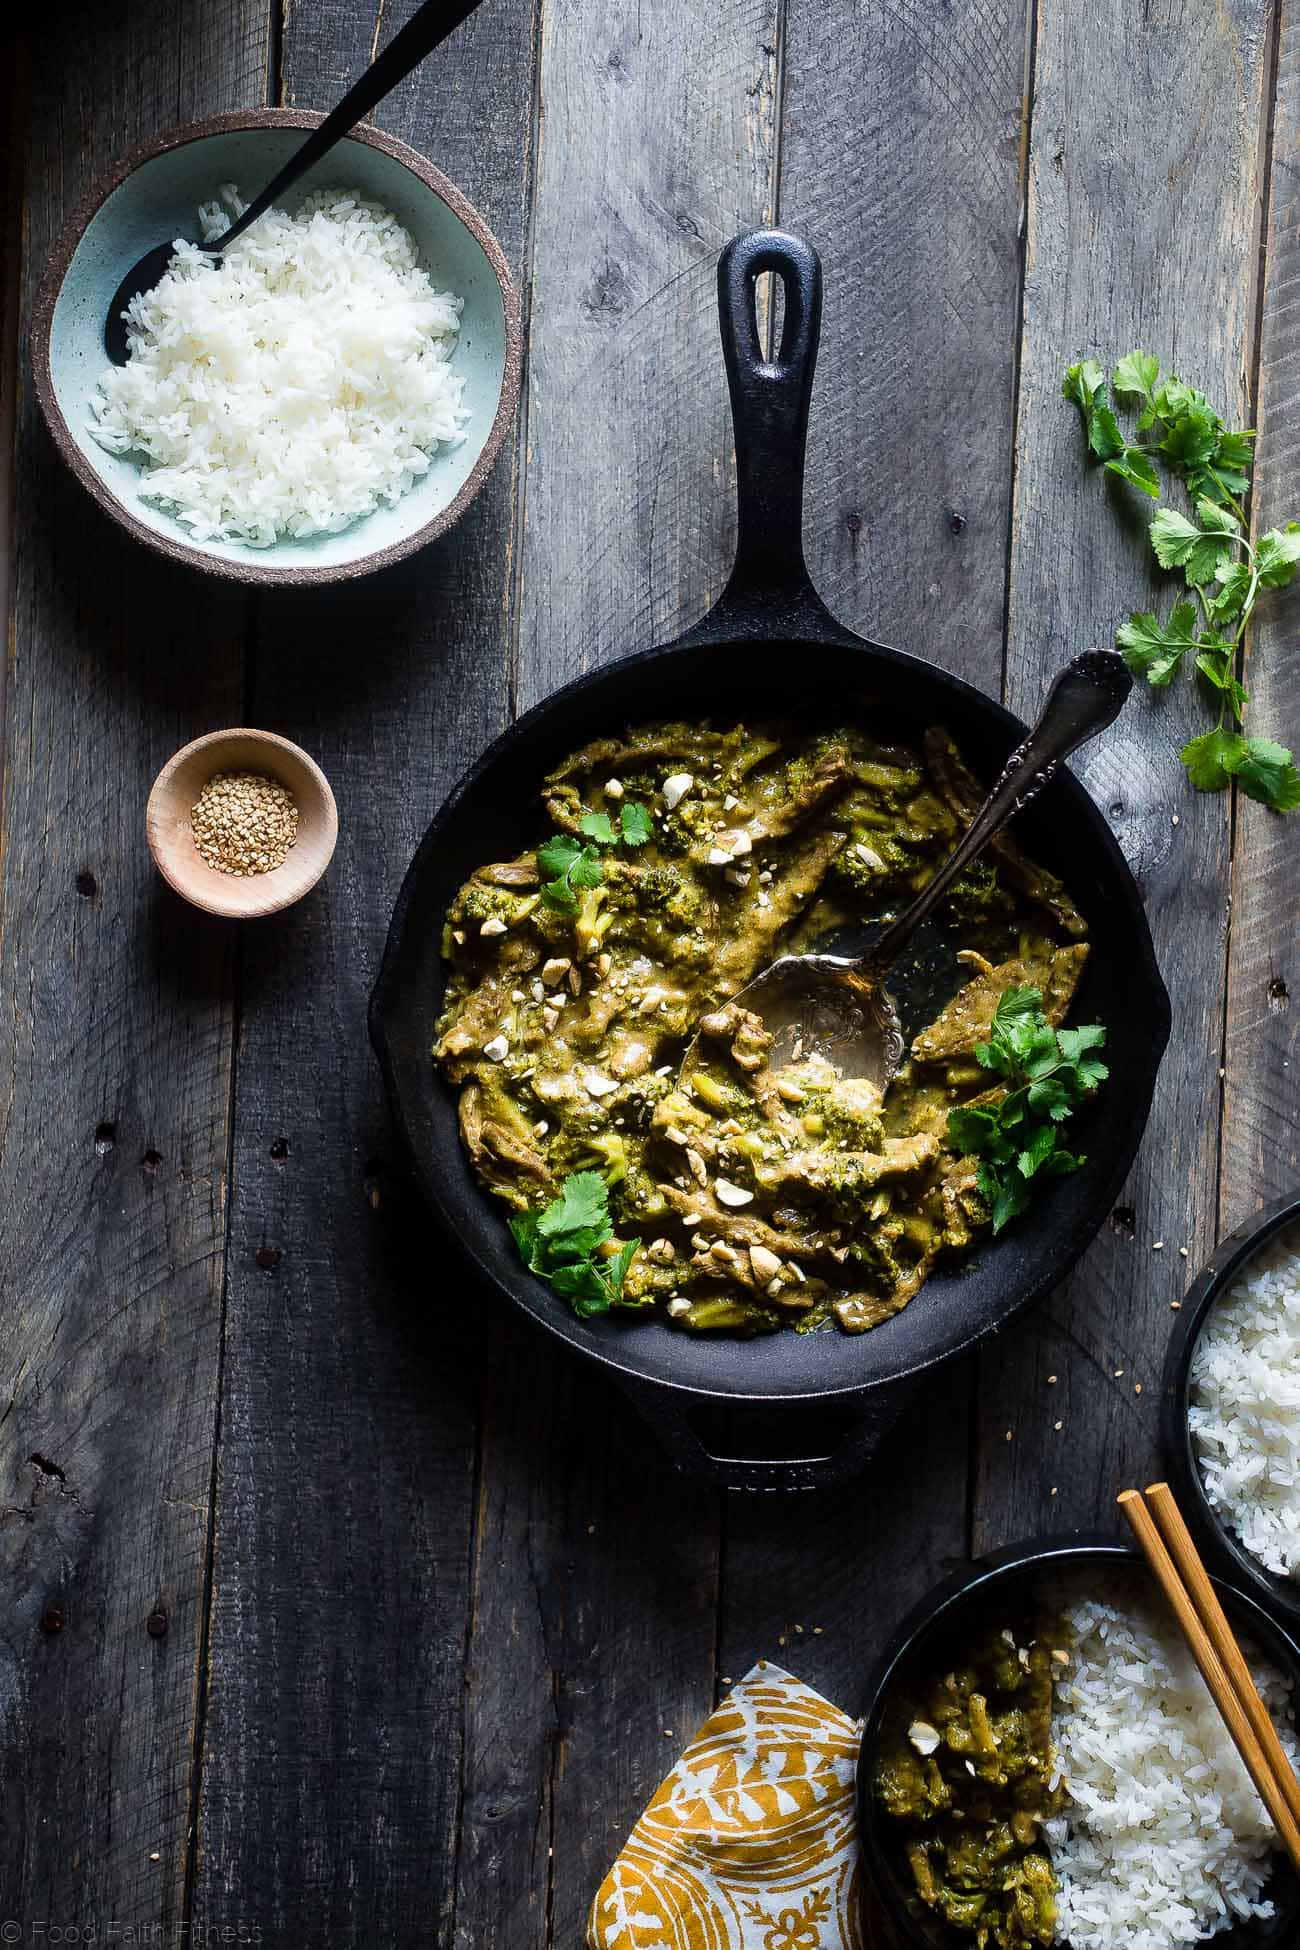 Whole30 Cashew Curry Beef and Broccoli - This quick and easy one pot curry beef and broccoli has creamy coconut milk and cashew butter! It's a healthy, low carb and whole30 approved weeknight meal! | Foodfaithfitness.com | @FoodFaithFit